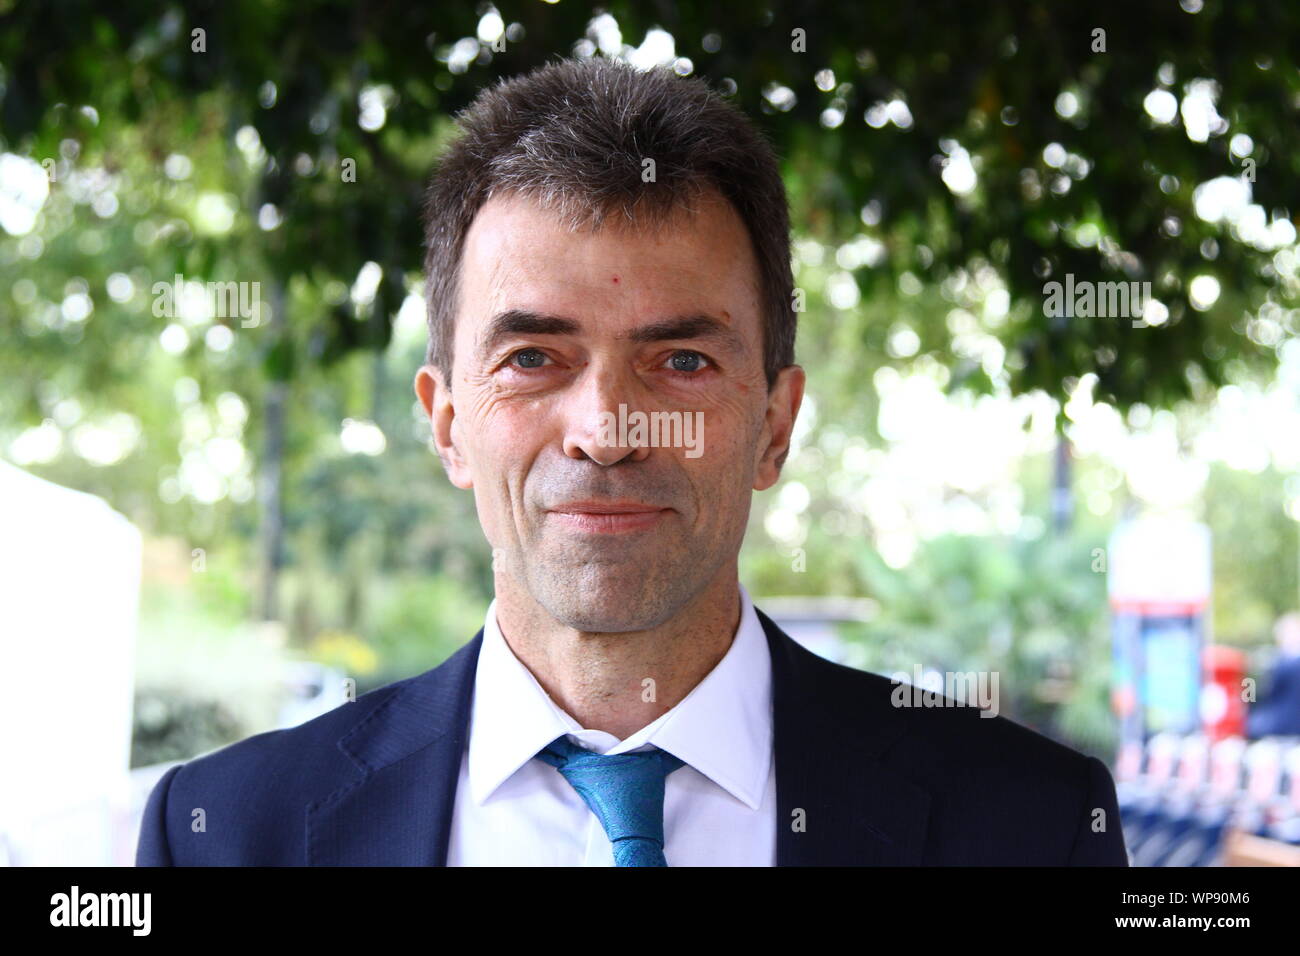 TOM BRAKE MP PICTURED AT COLLEGE GREEN , WESTMINSTER ON 5TH SEPTEMBER 2019. LIBERAL DEMOCRAT MEMEBER OF PARLIAMENT FOR CARSHALTON AND WALLINGTON CONSTITUENCY. BRITISH POLITICIANS. POLITICS. LONG SERVING MPS. LIB DEM MPS. Stock Photo